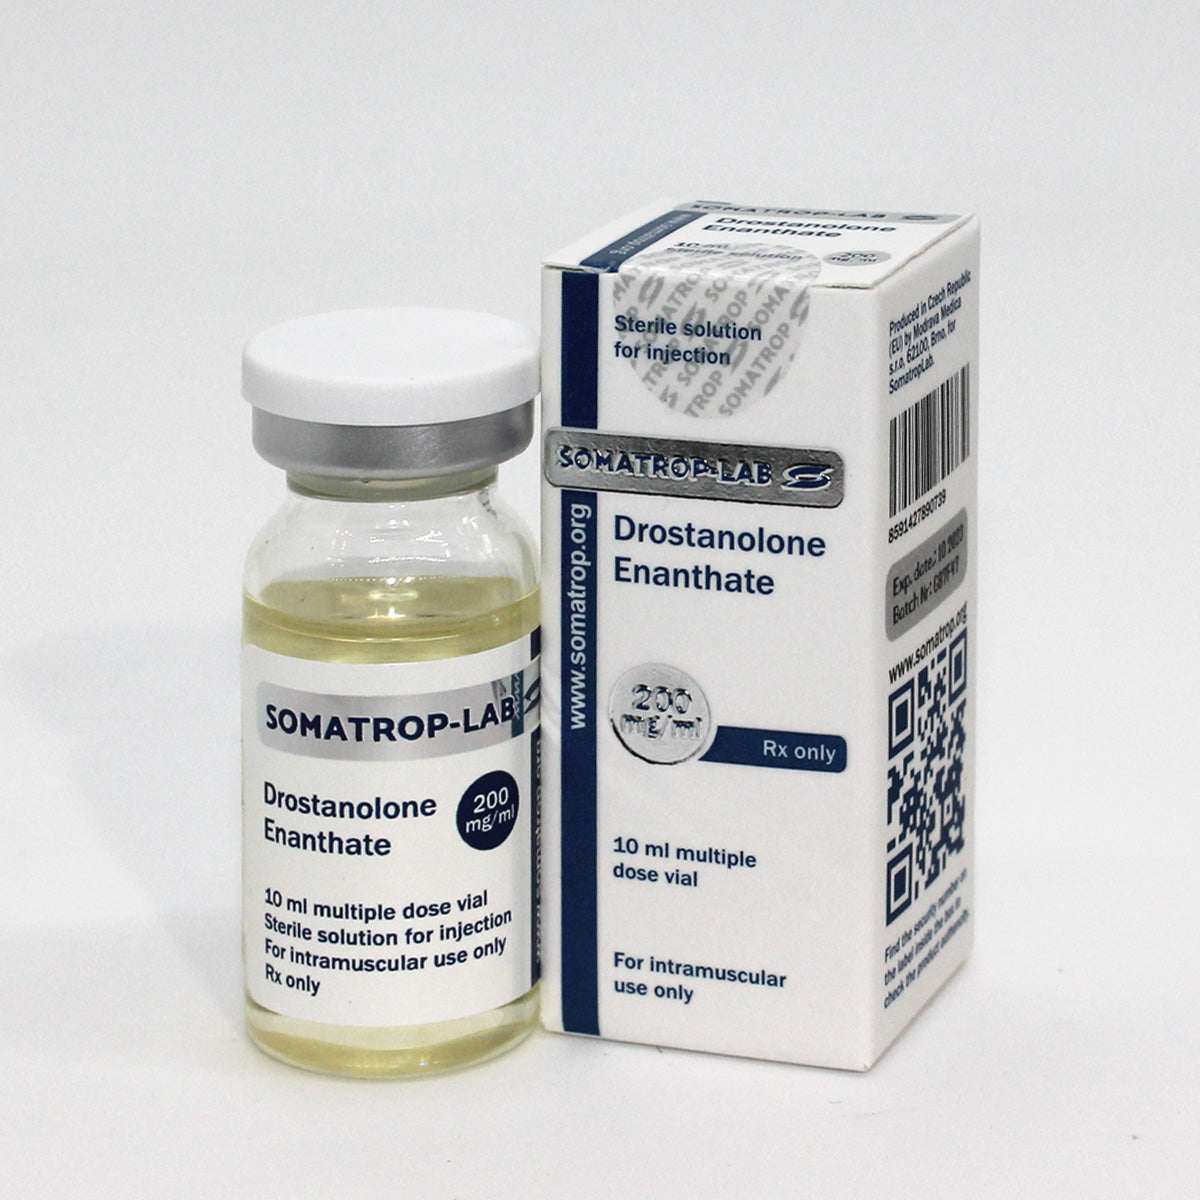 Somatrop-Lab Drostanolone Enanthate 10ml/200mg/ml front packaging.